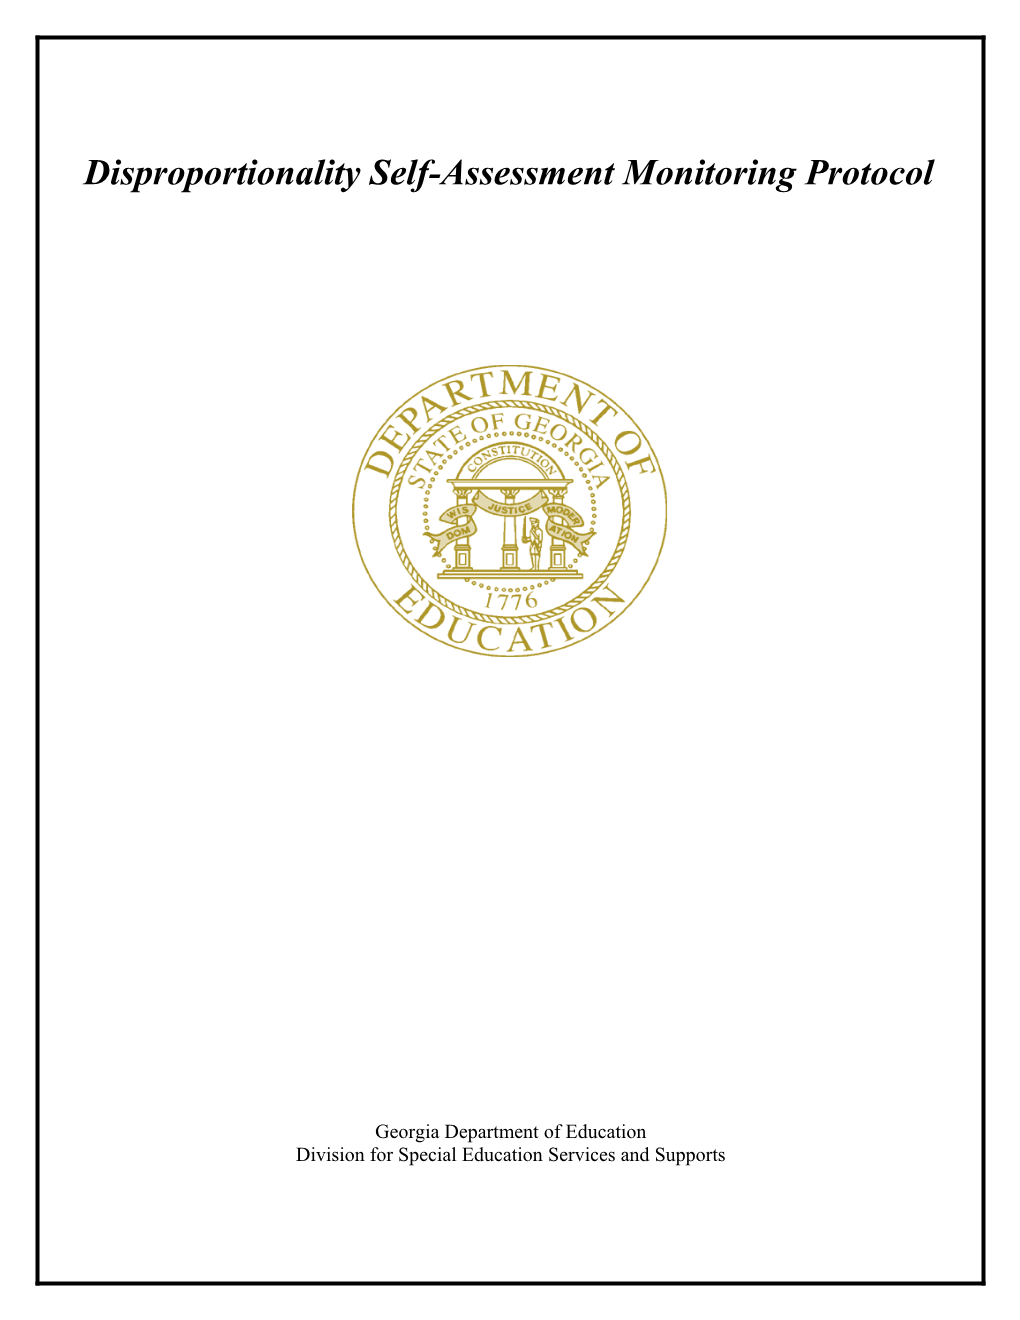 Disproportionality Self-Assessment Monitoring Protocol